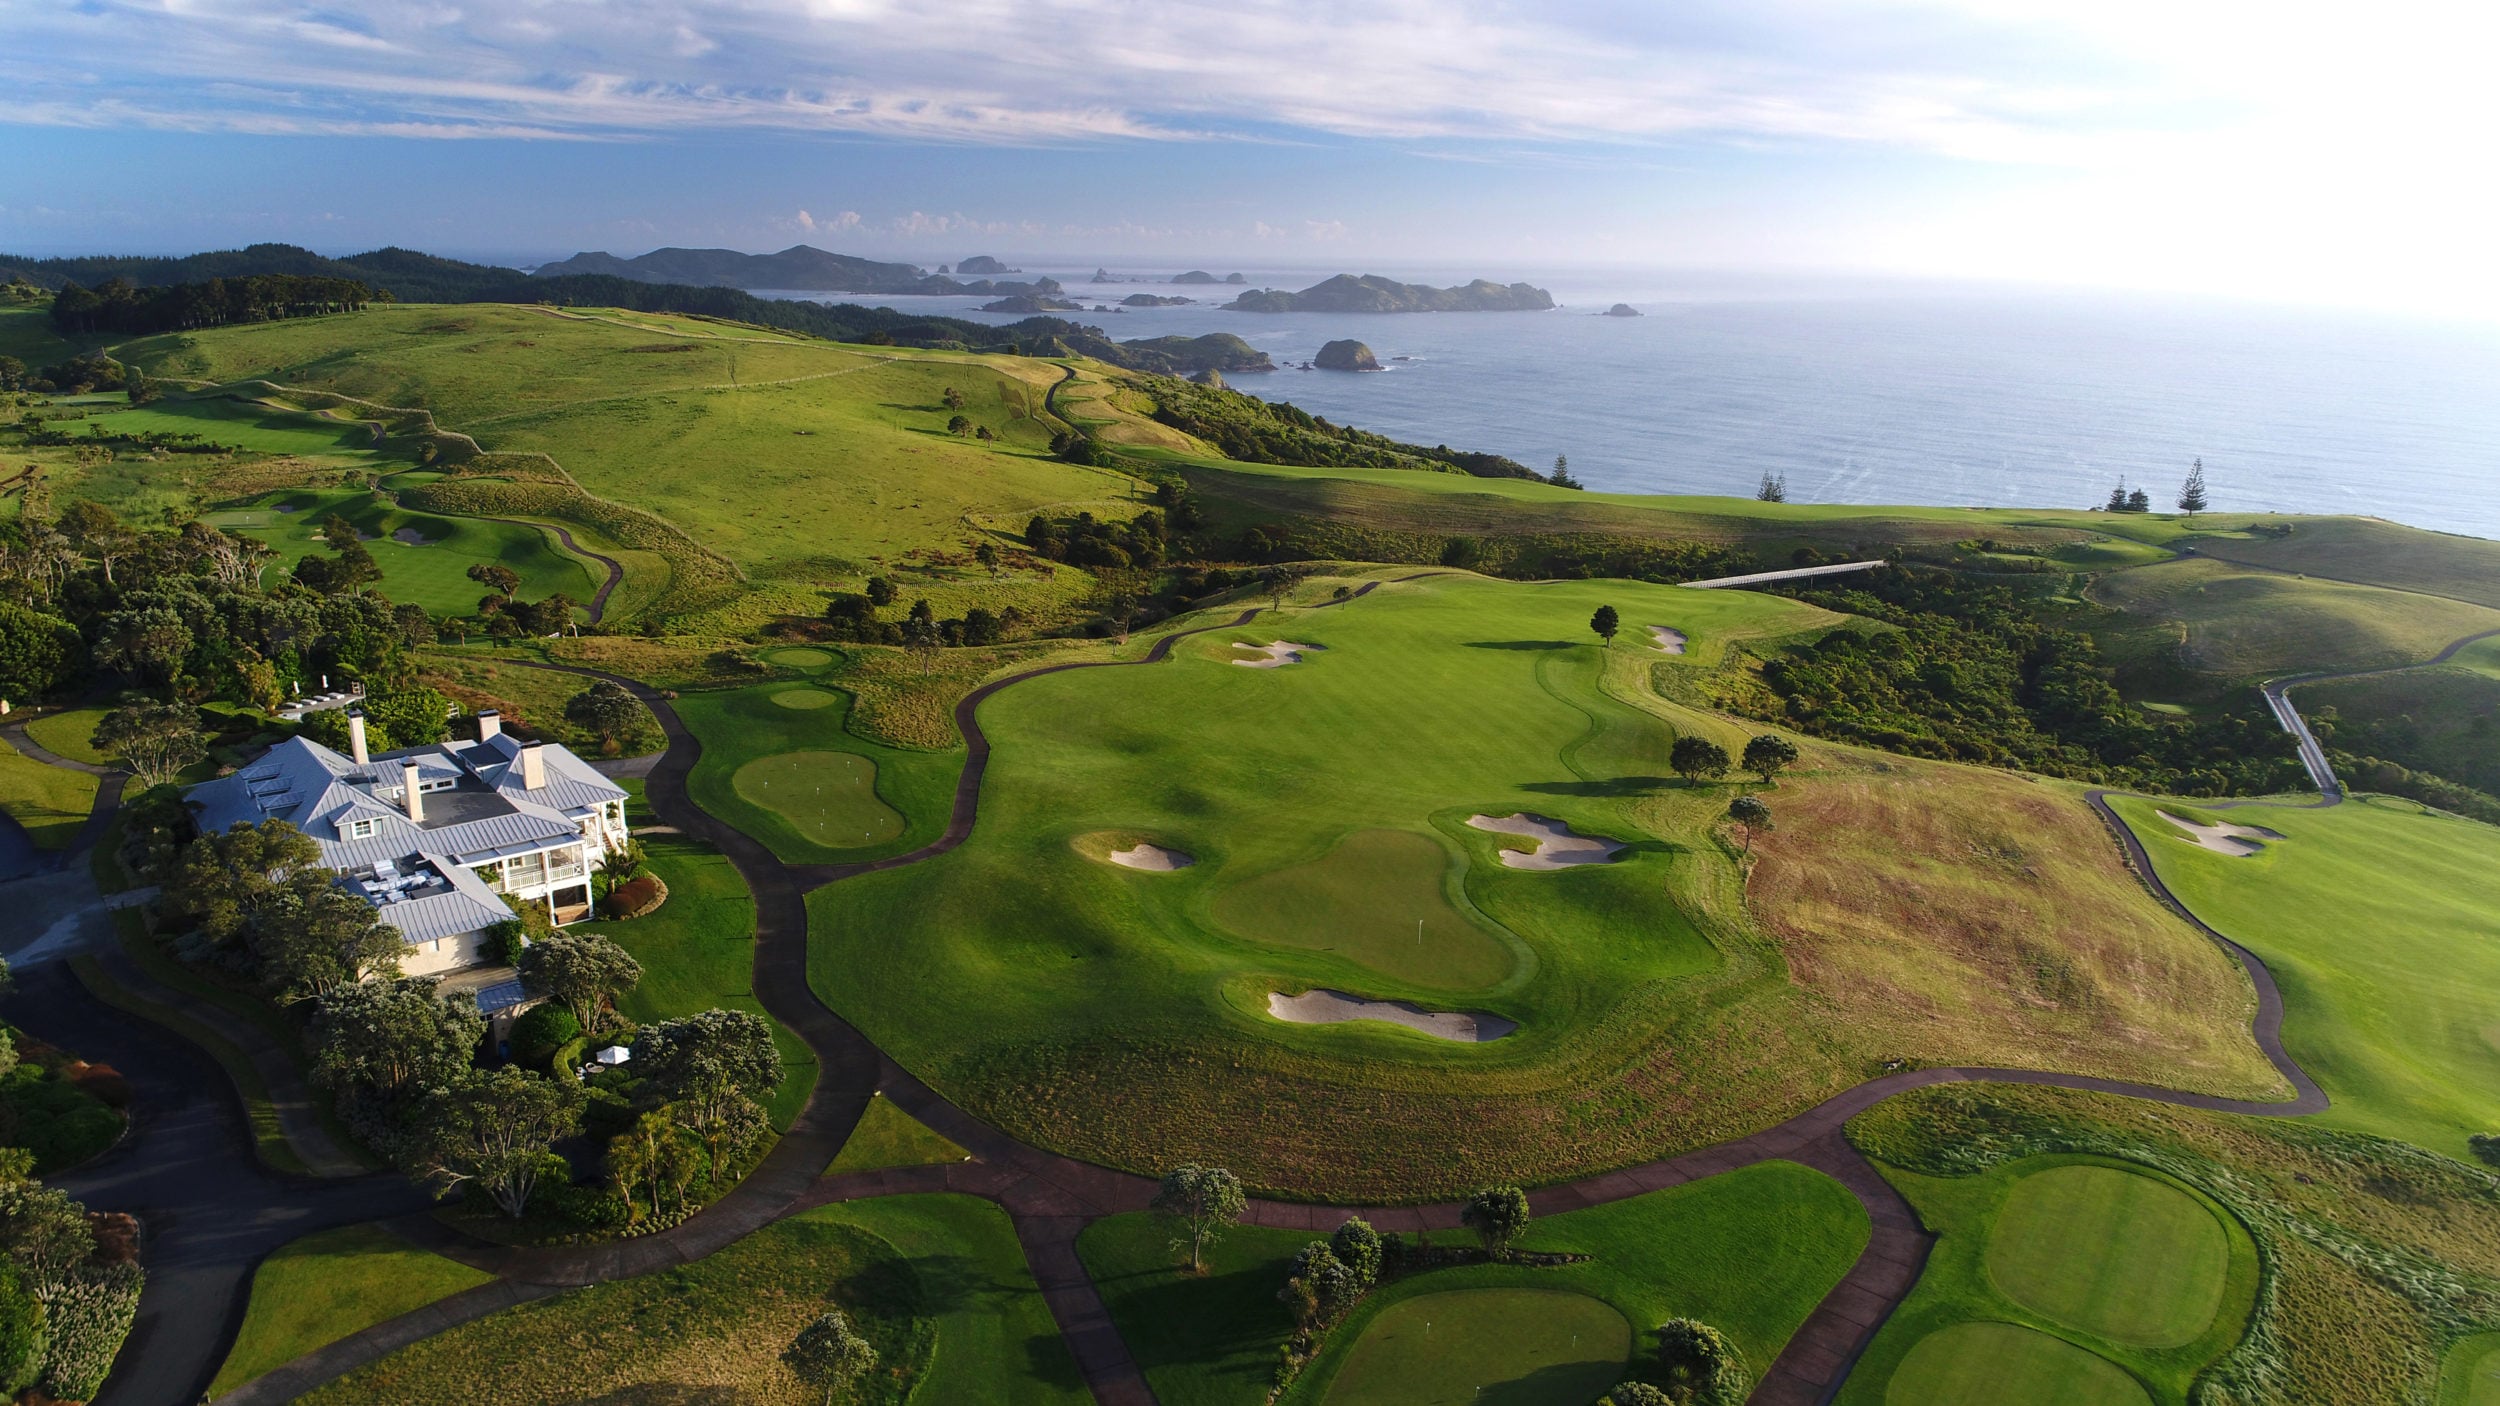 Aerial image of the clubhouse and surrounding golf course at Kauri Cliffs Resort